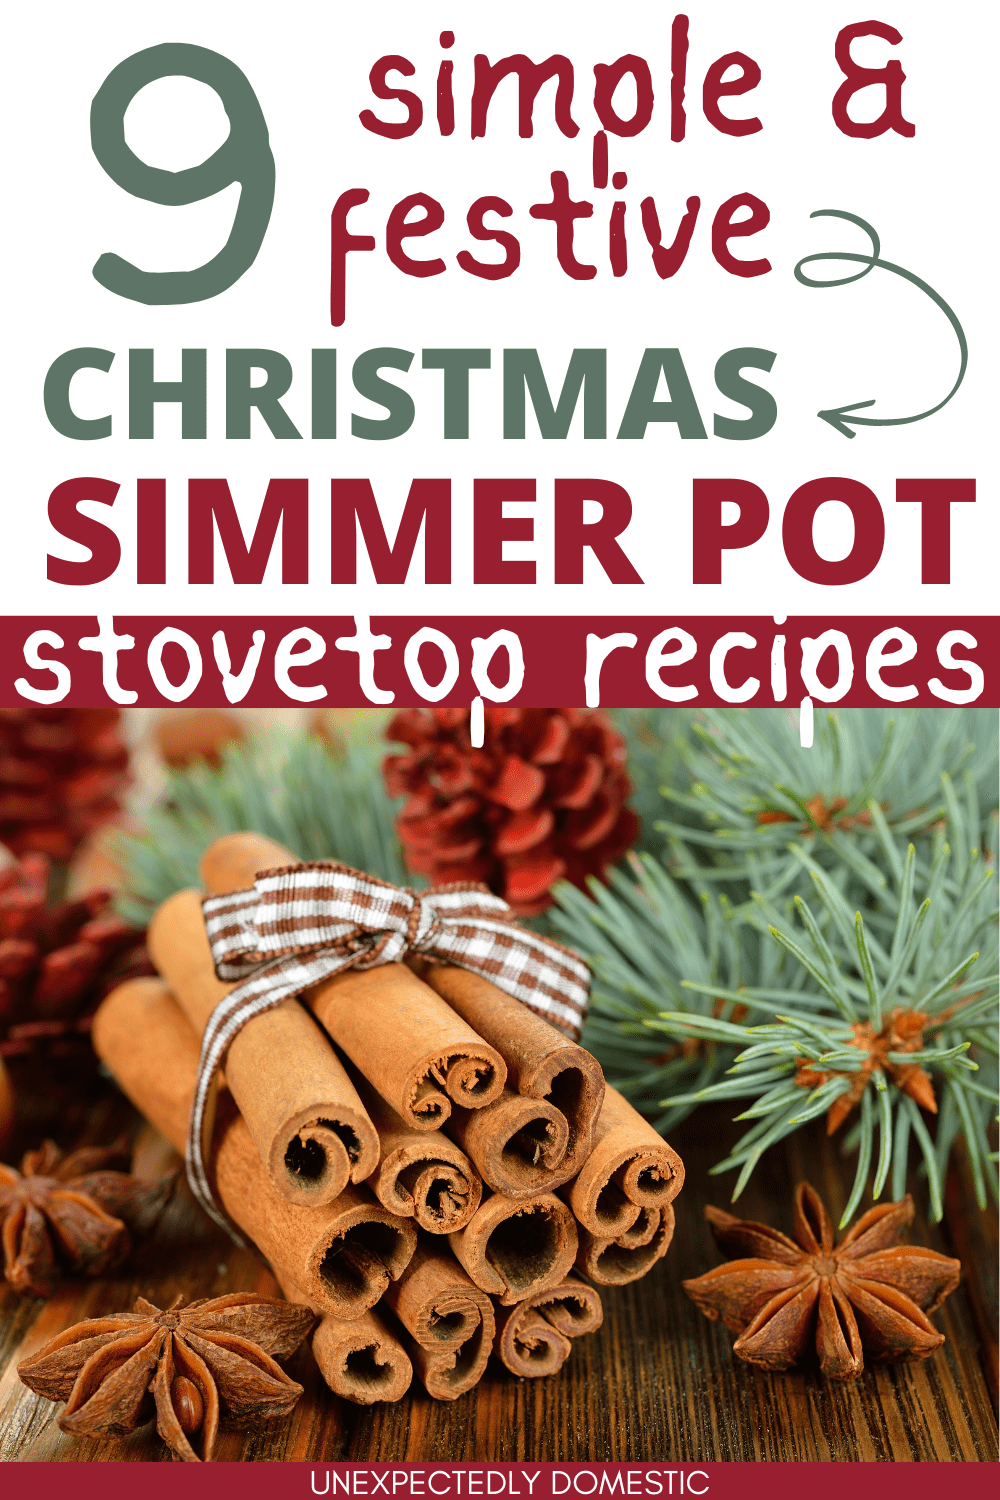 The best stovetop Christmas potpourri recipes! These festive holiday simmer pot recipes are a natural way to get the smells of Christmas in your own home - no expensive candles necessary!